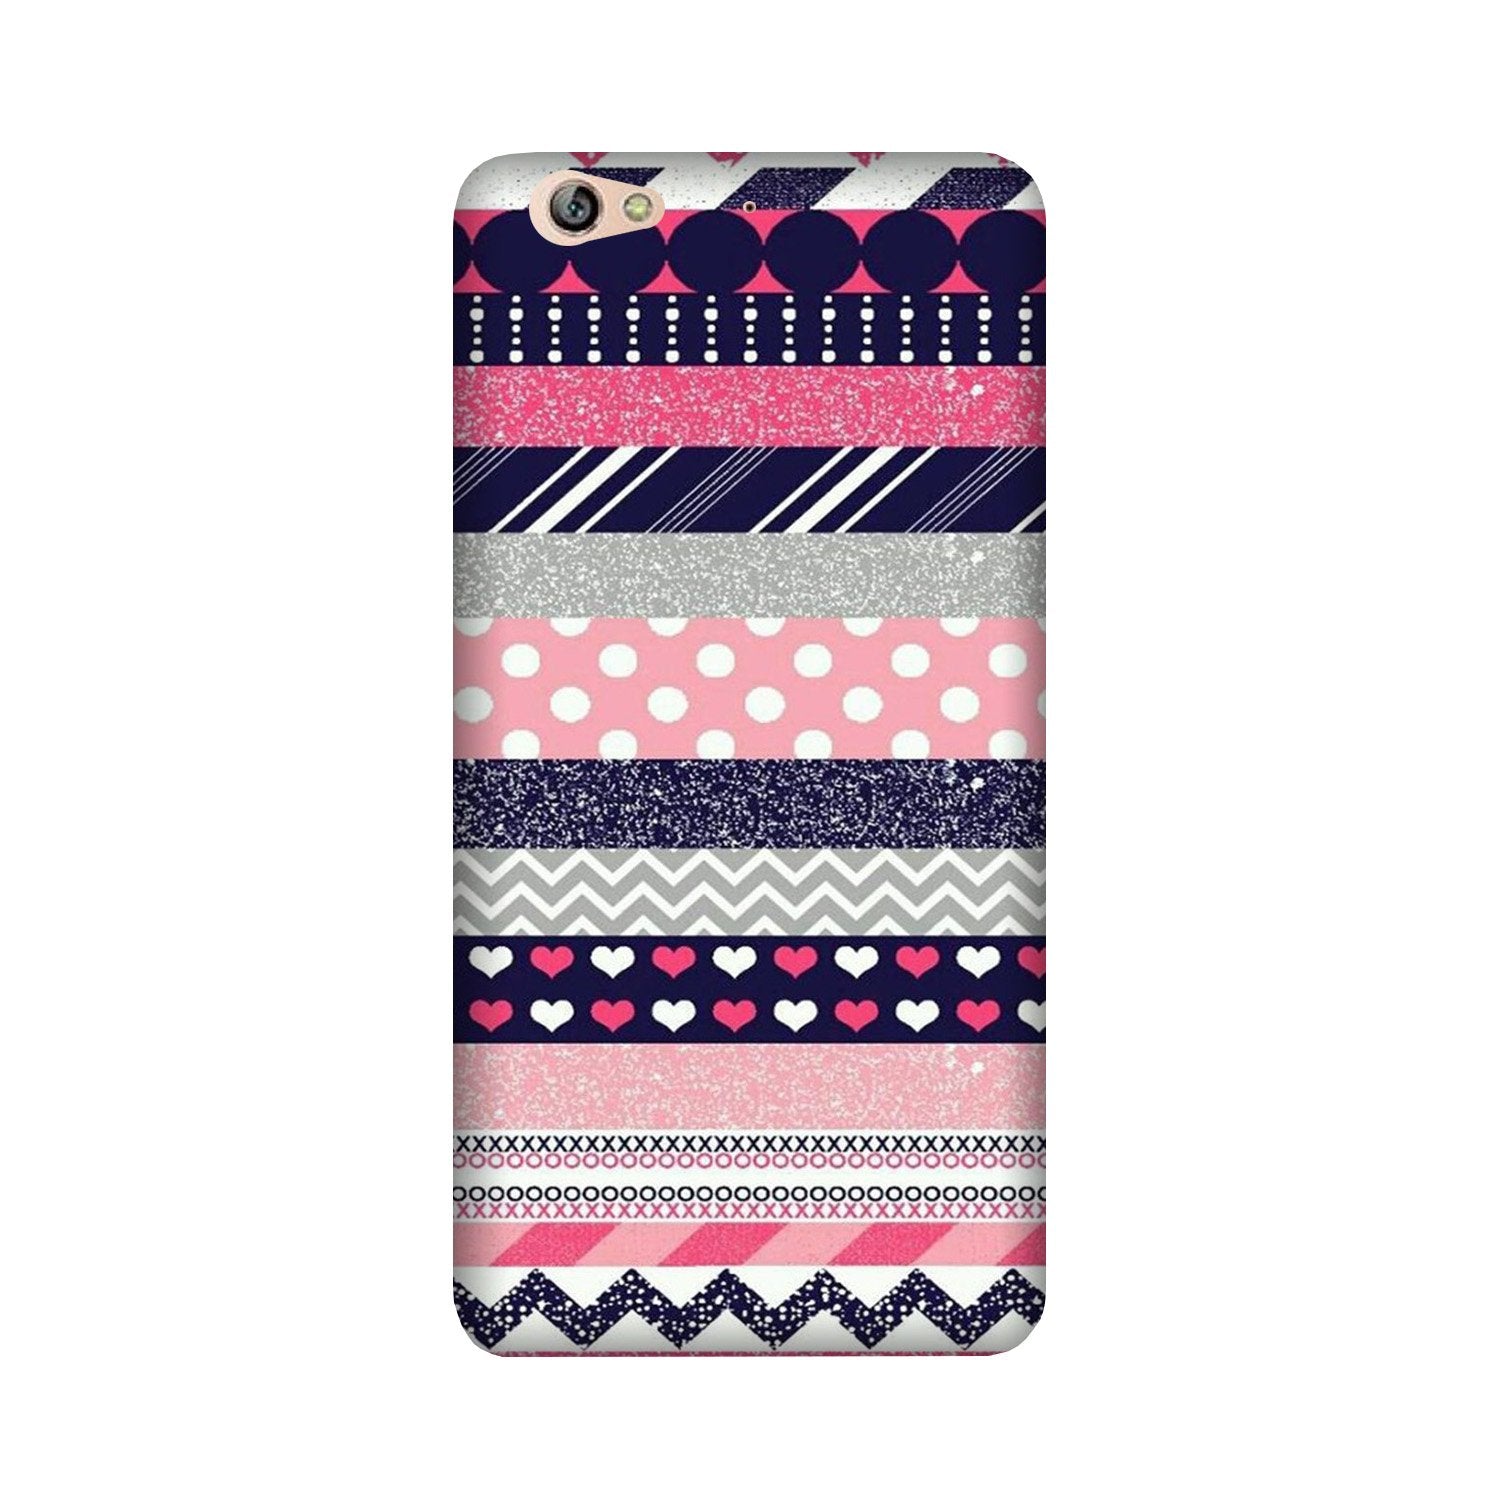 Pattern3 Case for Gionee S6